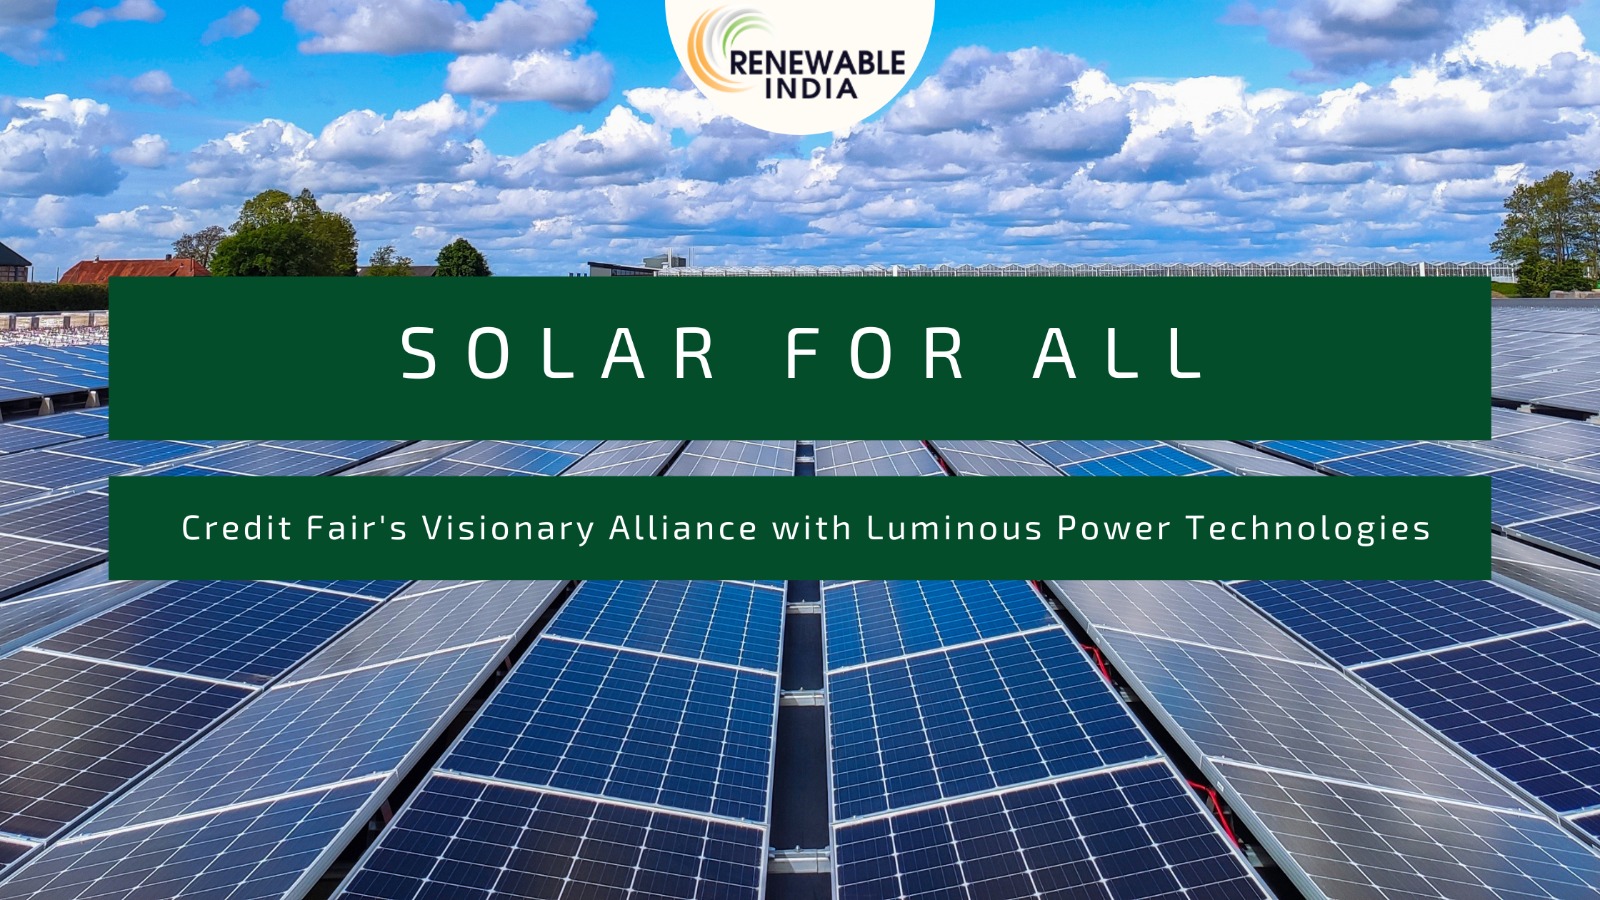 Credit Fair partners with Luminous Power Technologies for offering affordable rooftop solar solutions